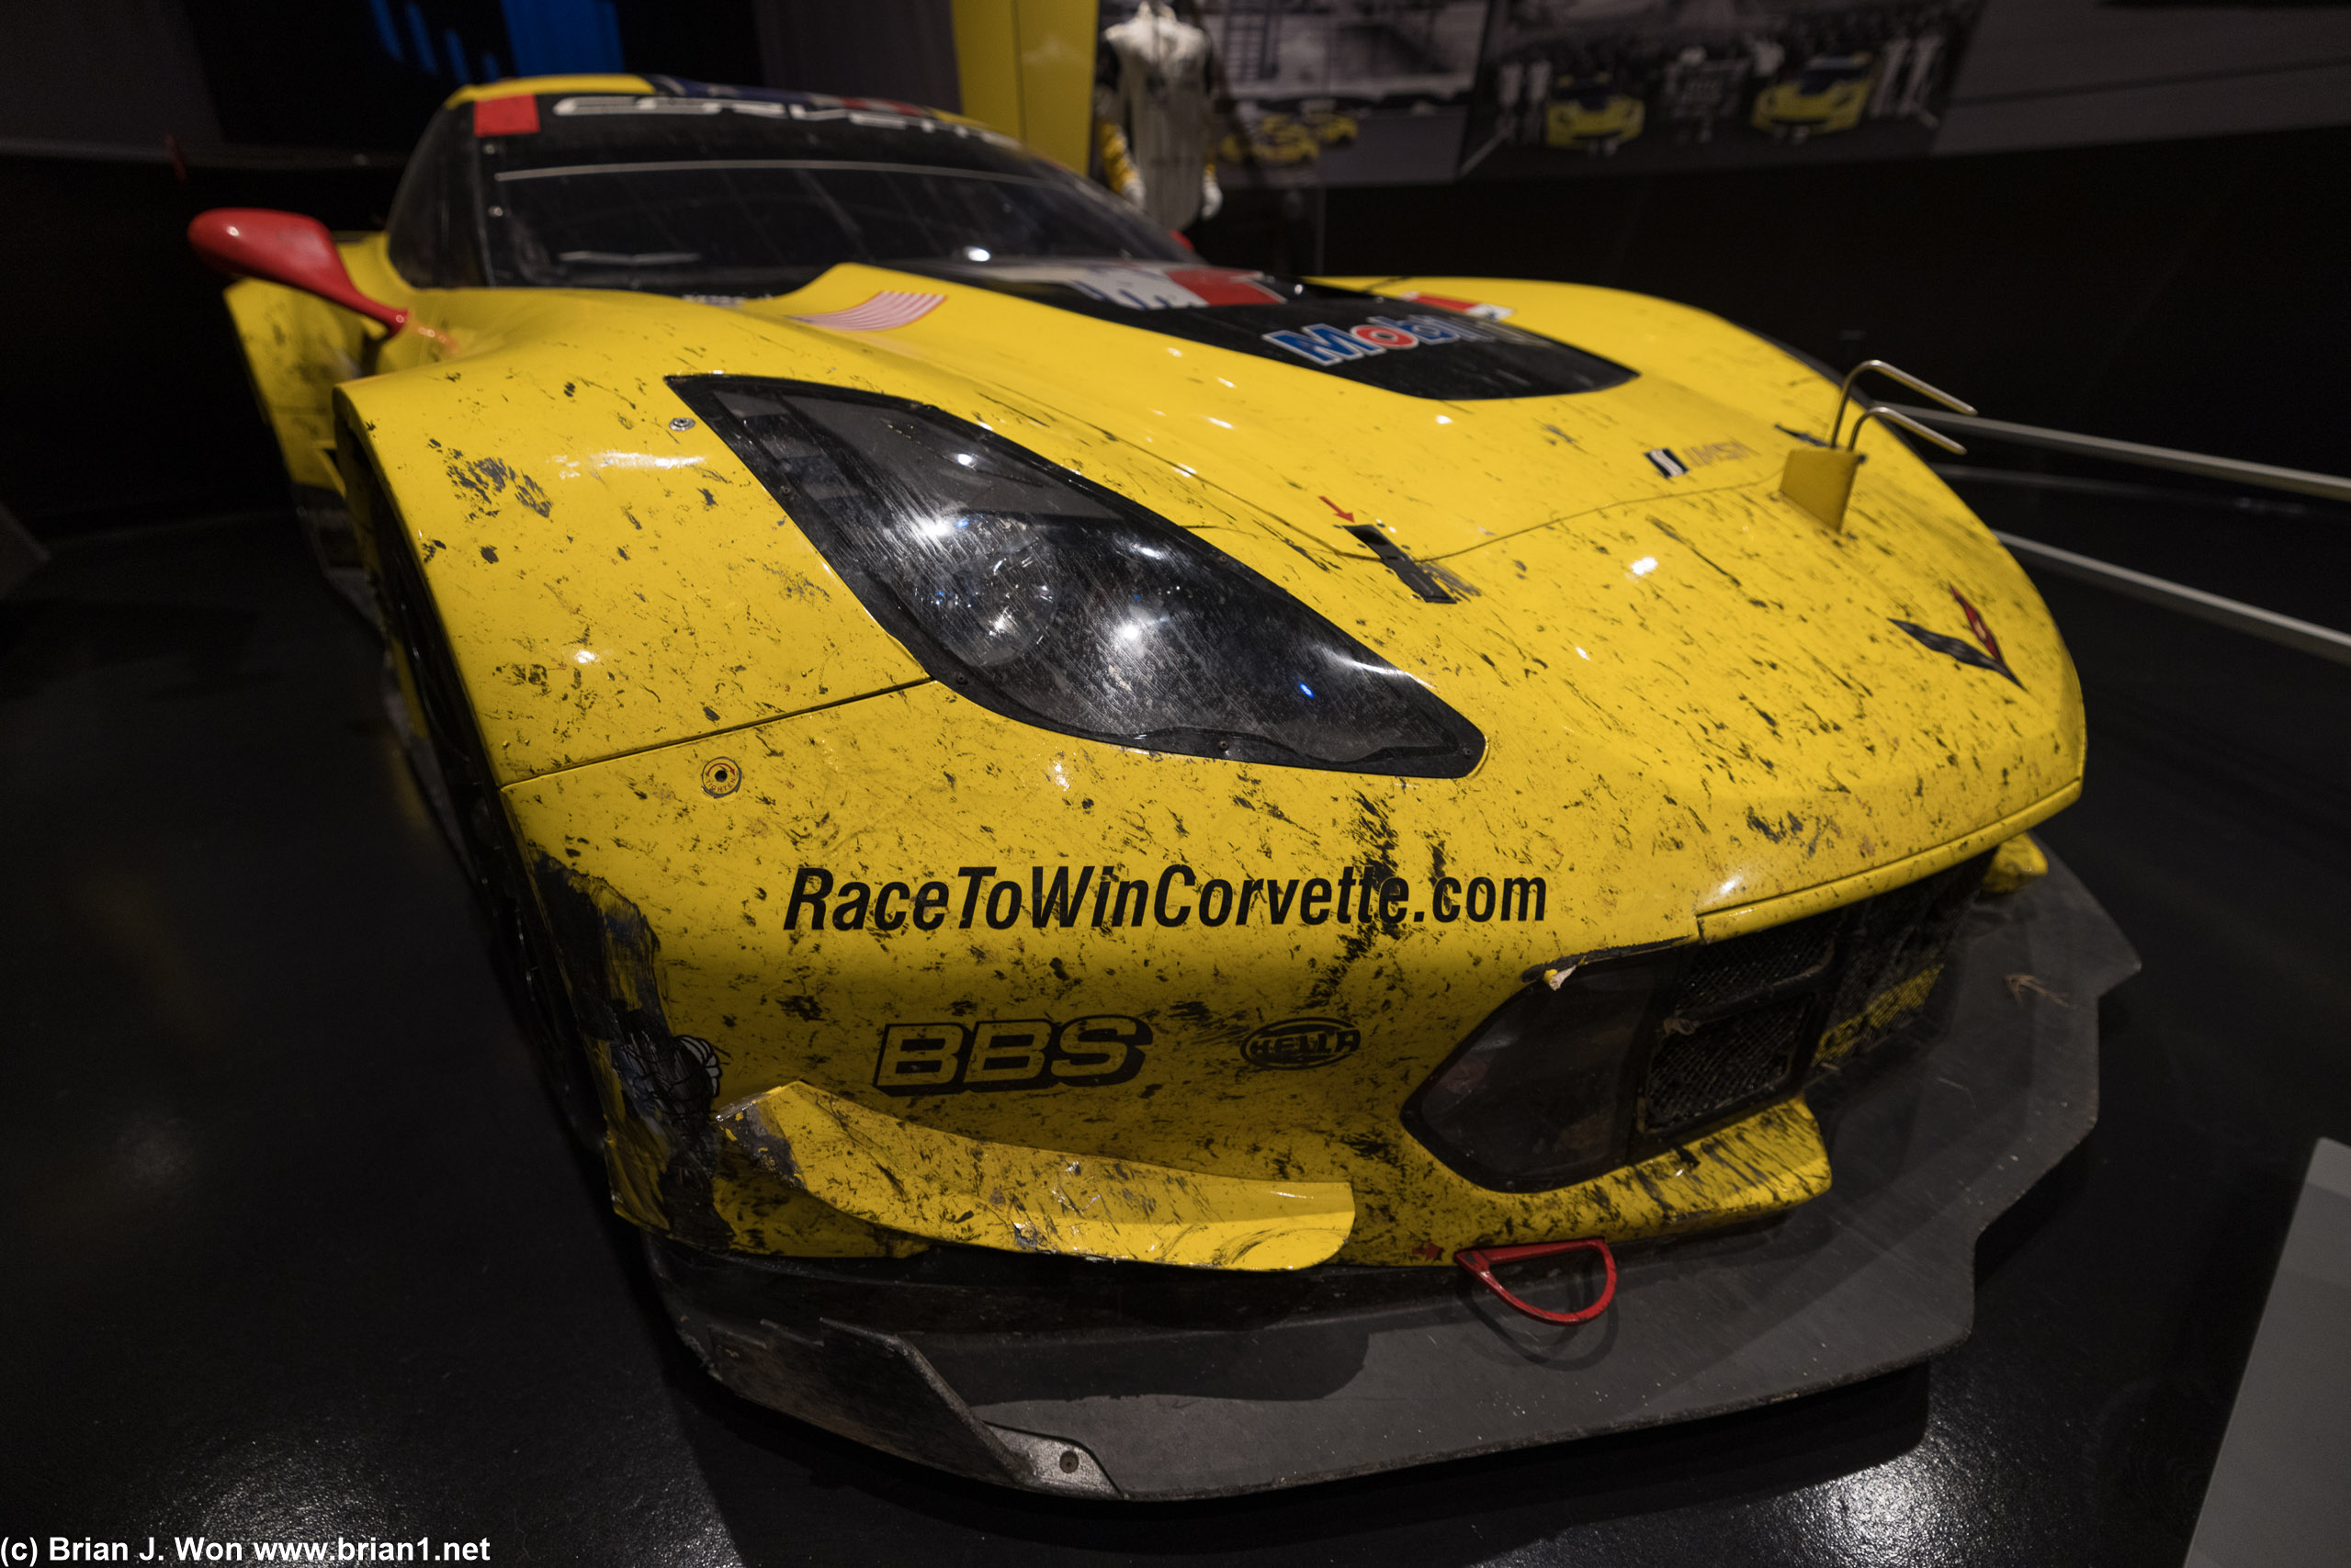 2015 C7.R race car, made famous at the 2016 Rolex 24 Hours of Dayota with their 1-2 finish. 5.5L V8, 6-speed semi-automatic, 490whp est. on E20, 2447lbs.